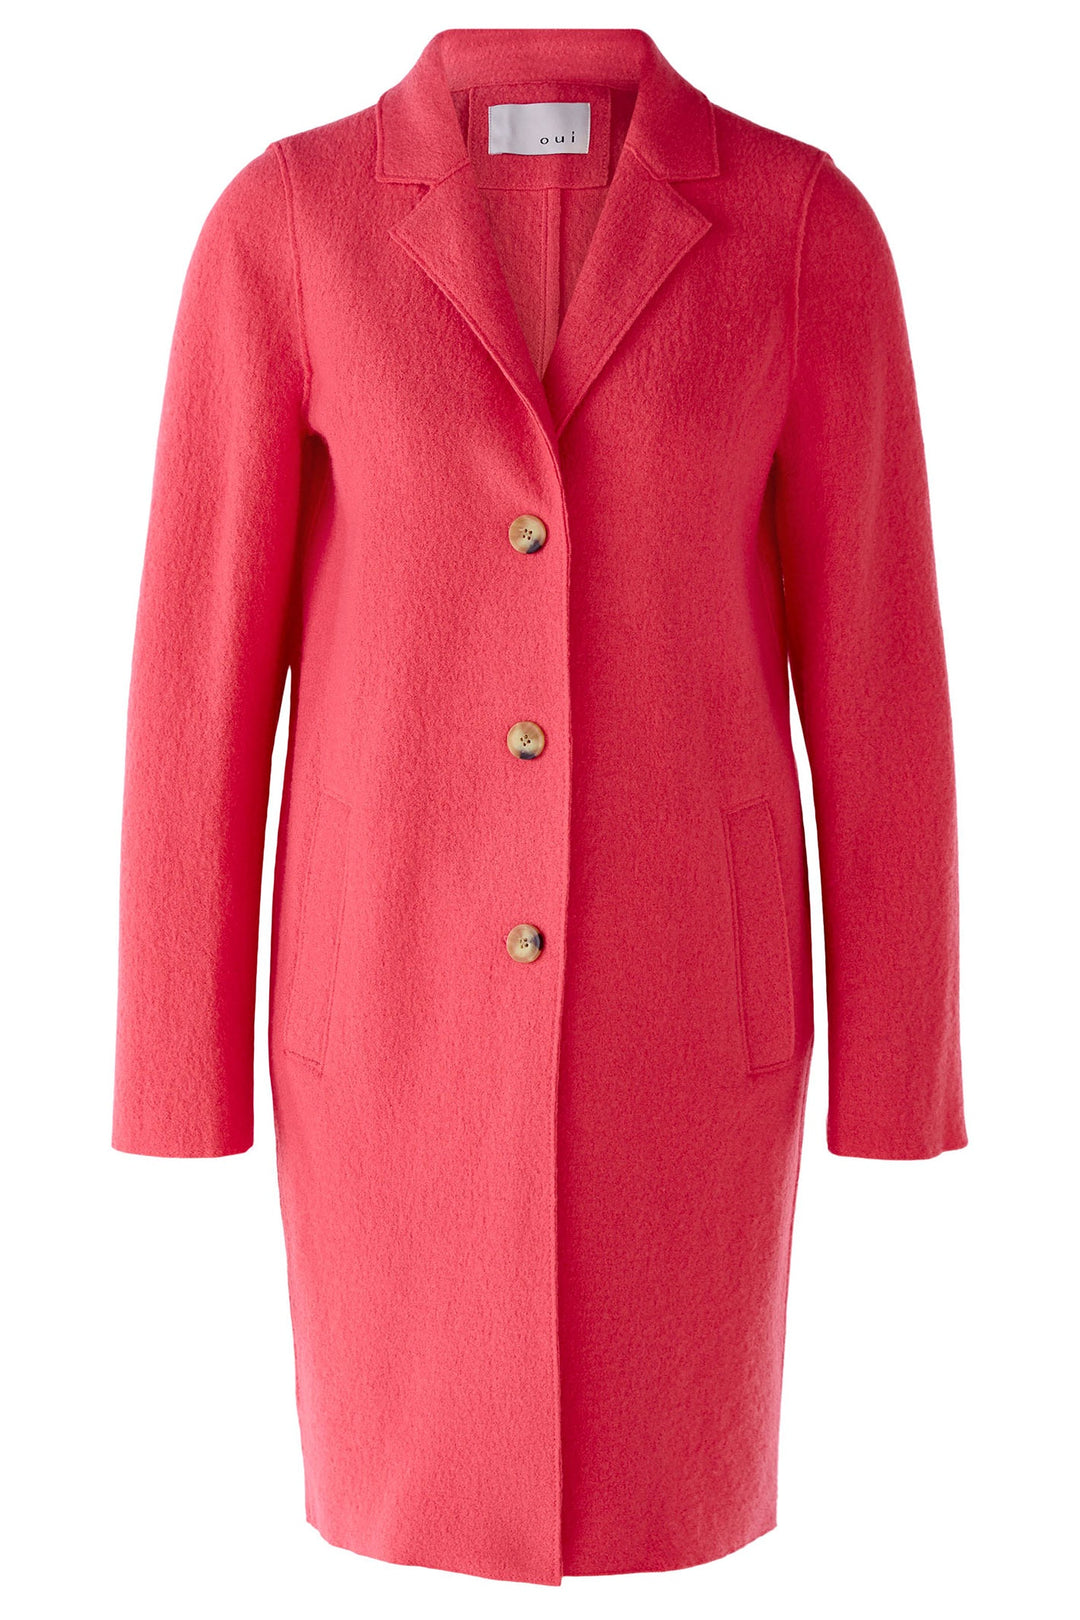 Oui 77627 Pink Boiled Wool Coat - Dotique